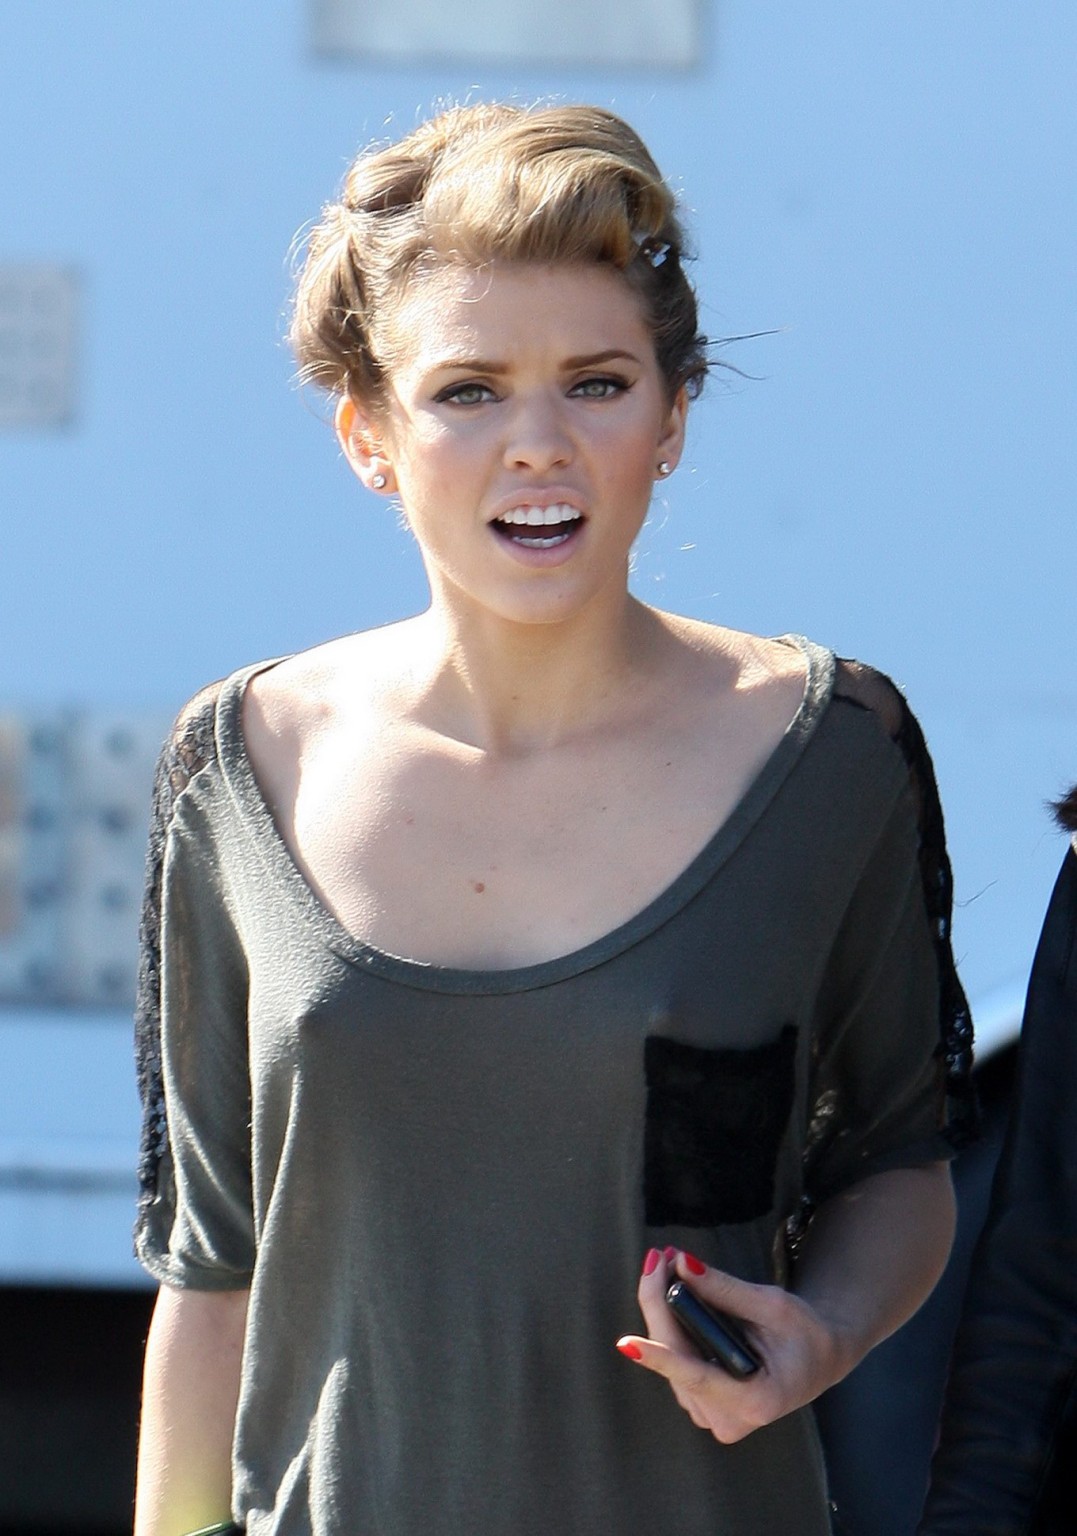 AnnaLynne McCord braless wearing see through top on the '90210' set in LA #75281636